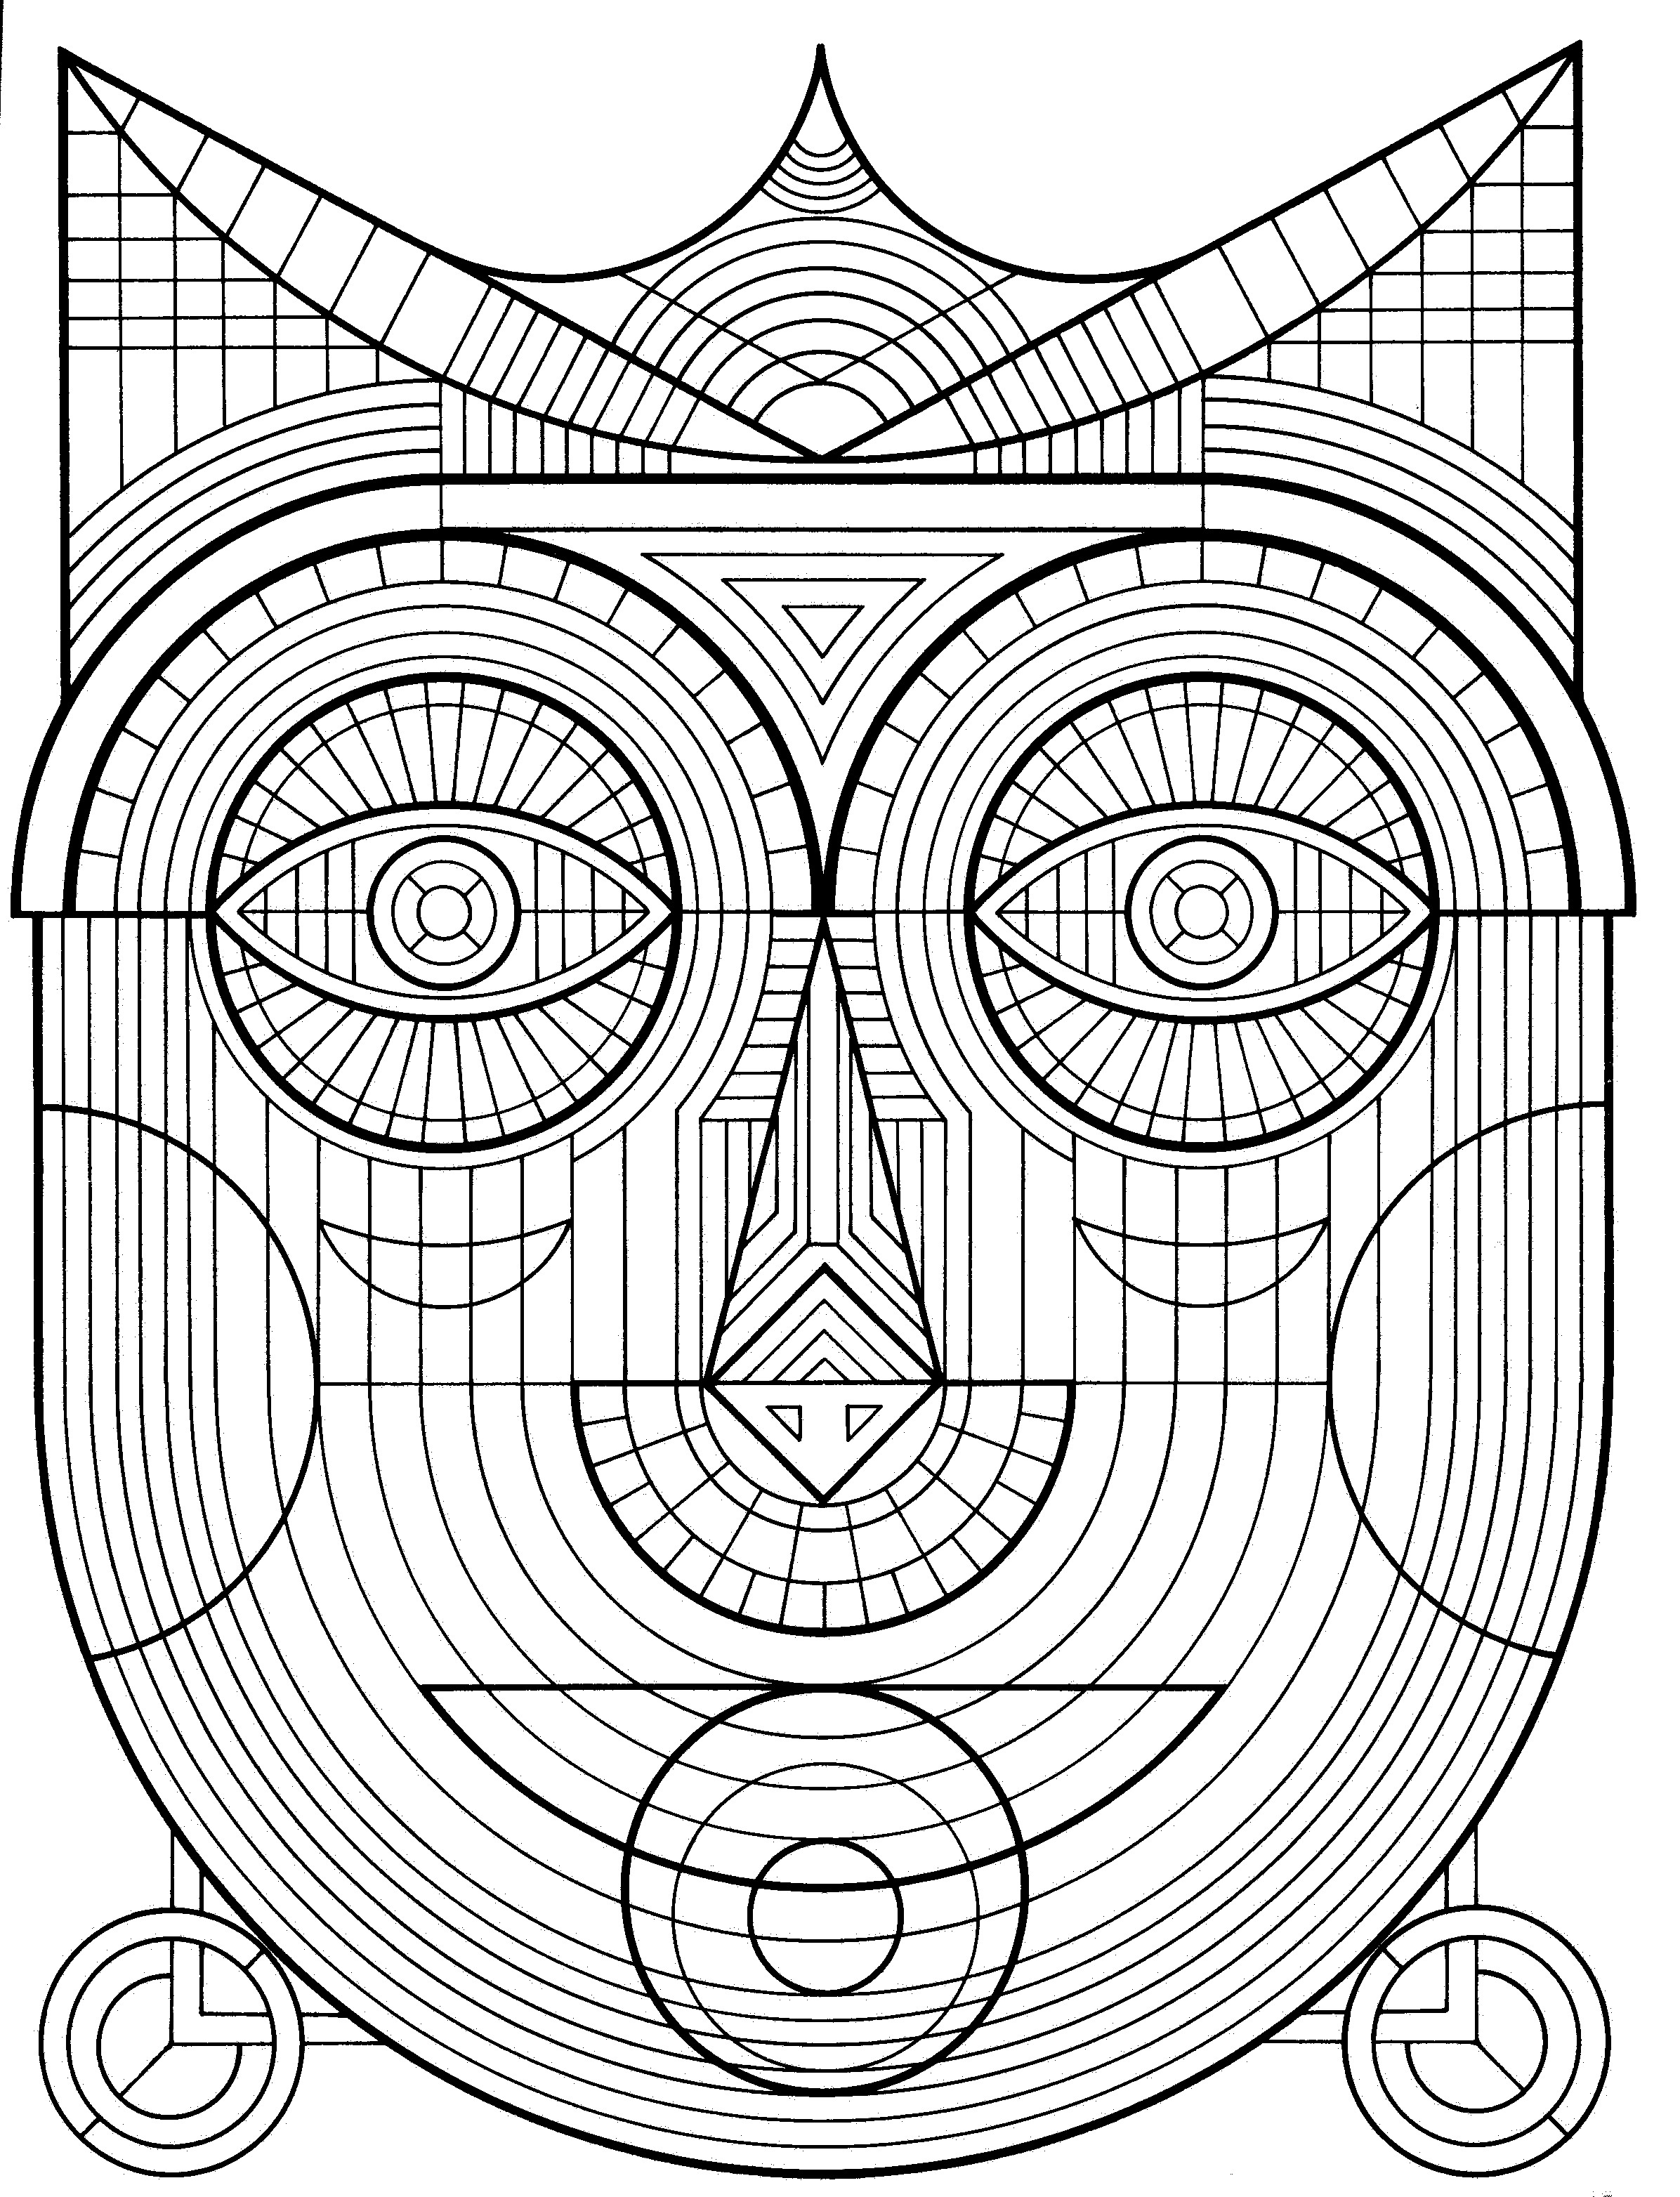 Adult Coloring Pages Easy
 Free Printable Geometric Coloring Pages for Adults